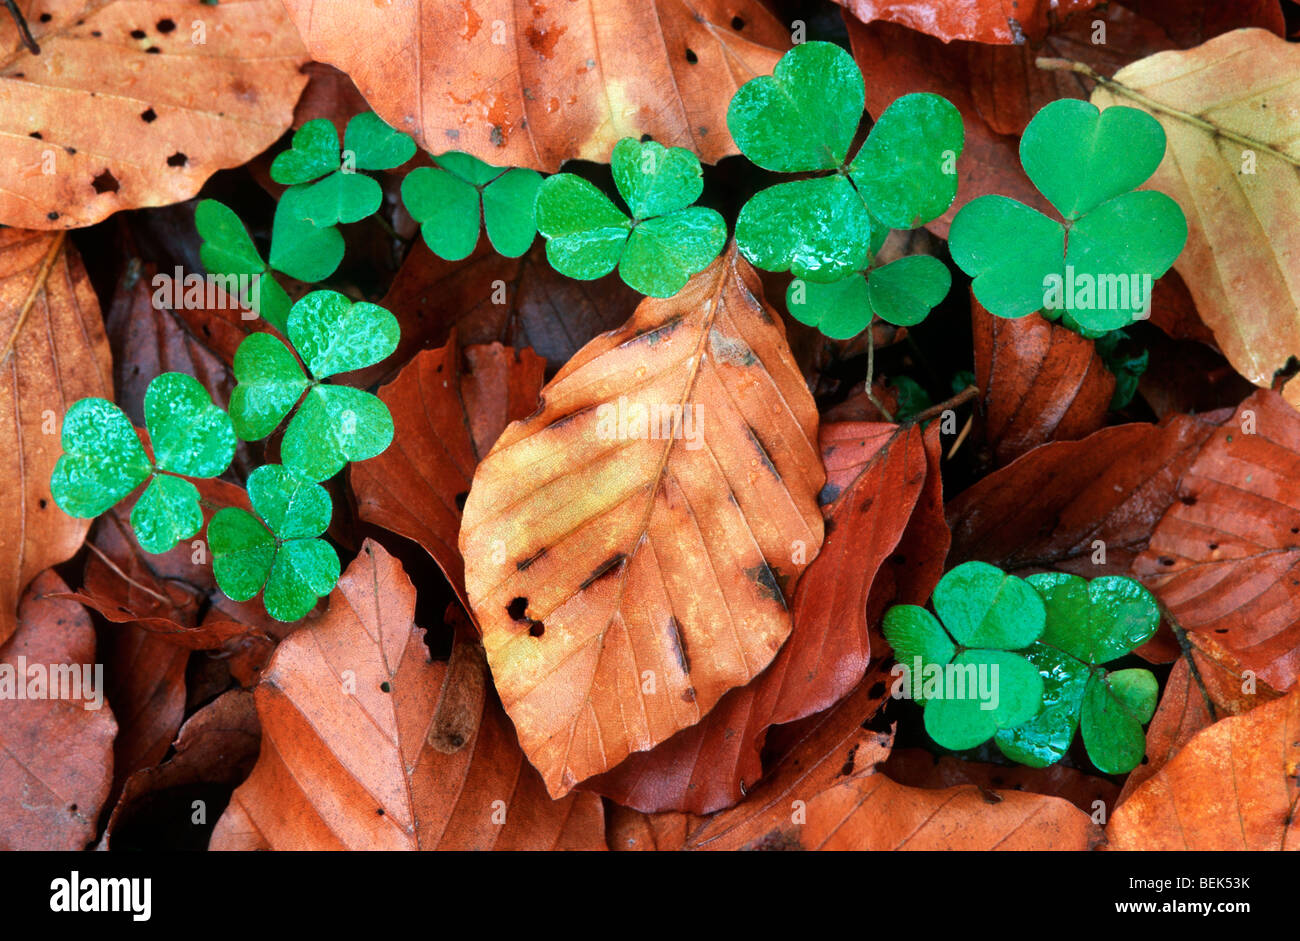 Clover (Trifolium sp.) among fallen beech leaves in autumn forest Stock Photo